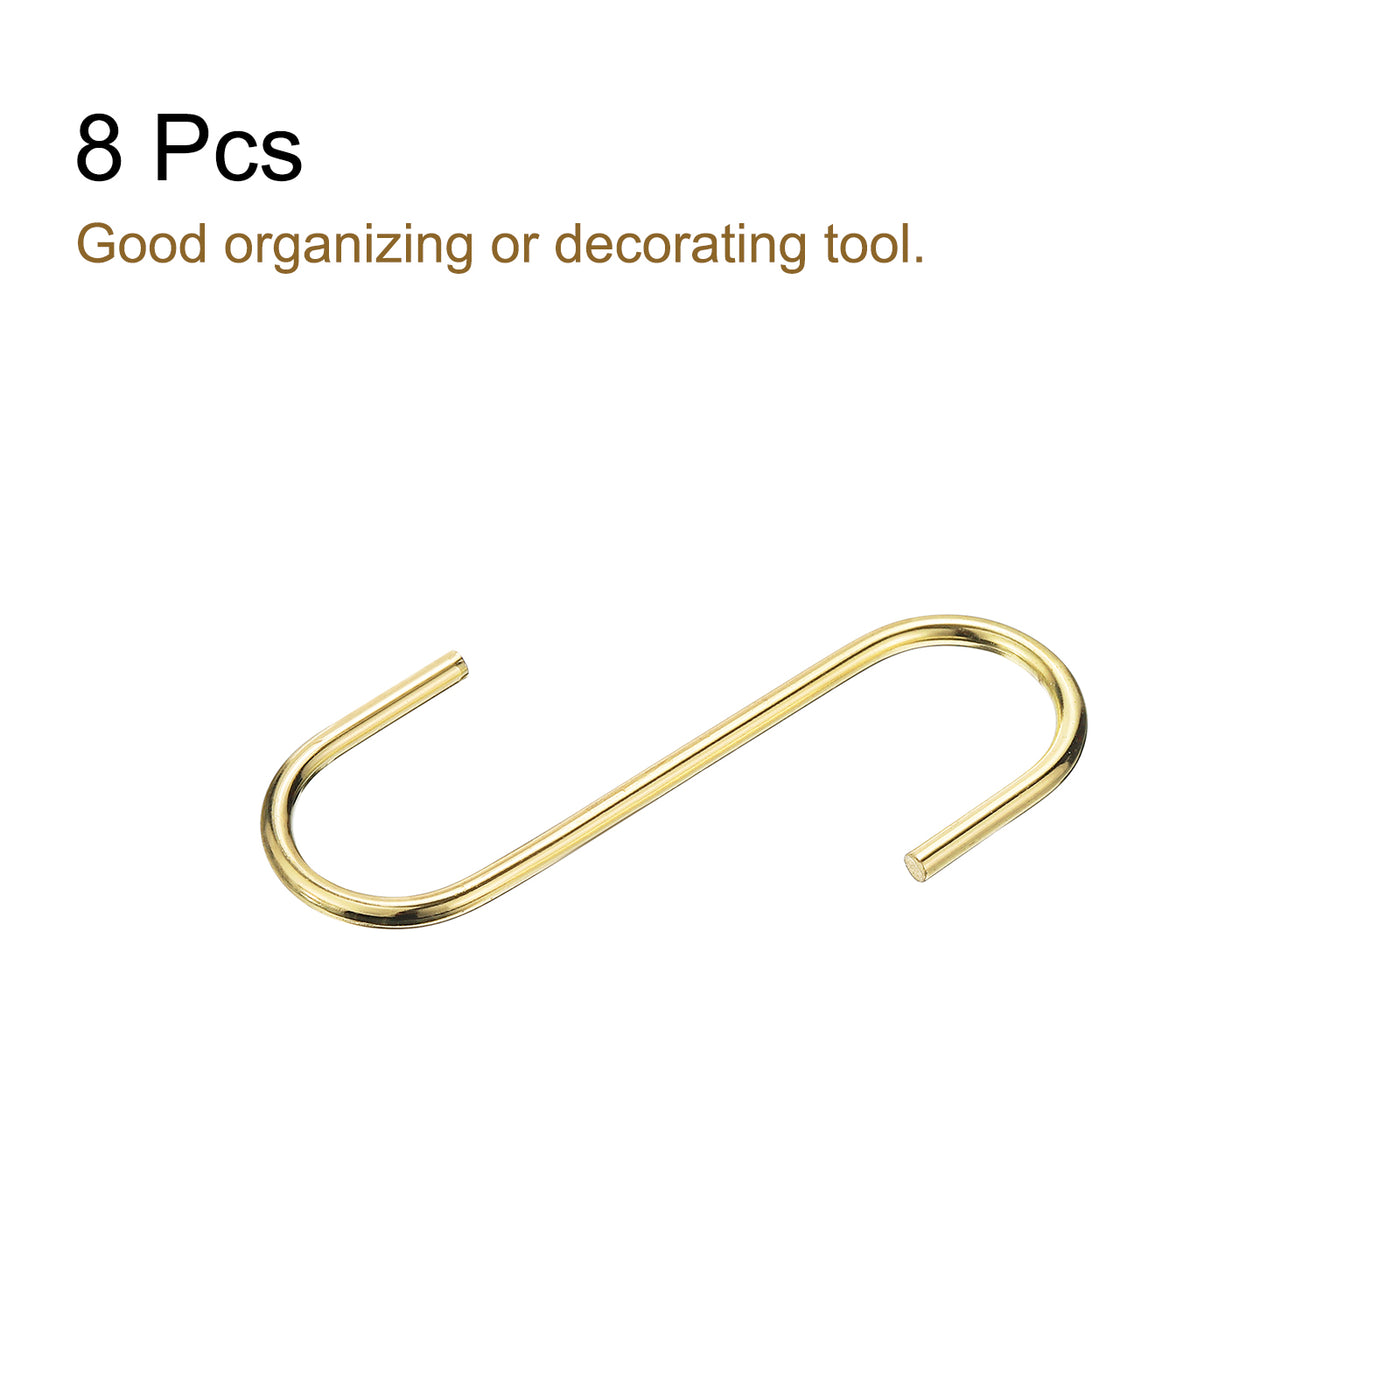 uxcell Uxcell S Hanging Hooks, 5inch(120mm) Extra Long Steel Hanger, Indoor Outdoor Uses for Garden, Bathroom, Closet, Workshop, Kitchen, Gold Tone, 8Pcs